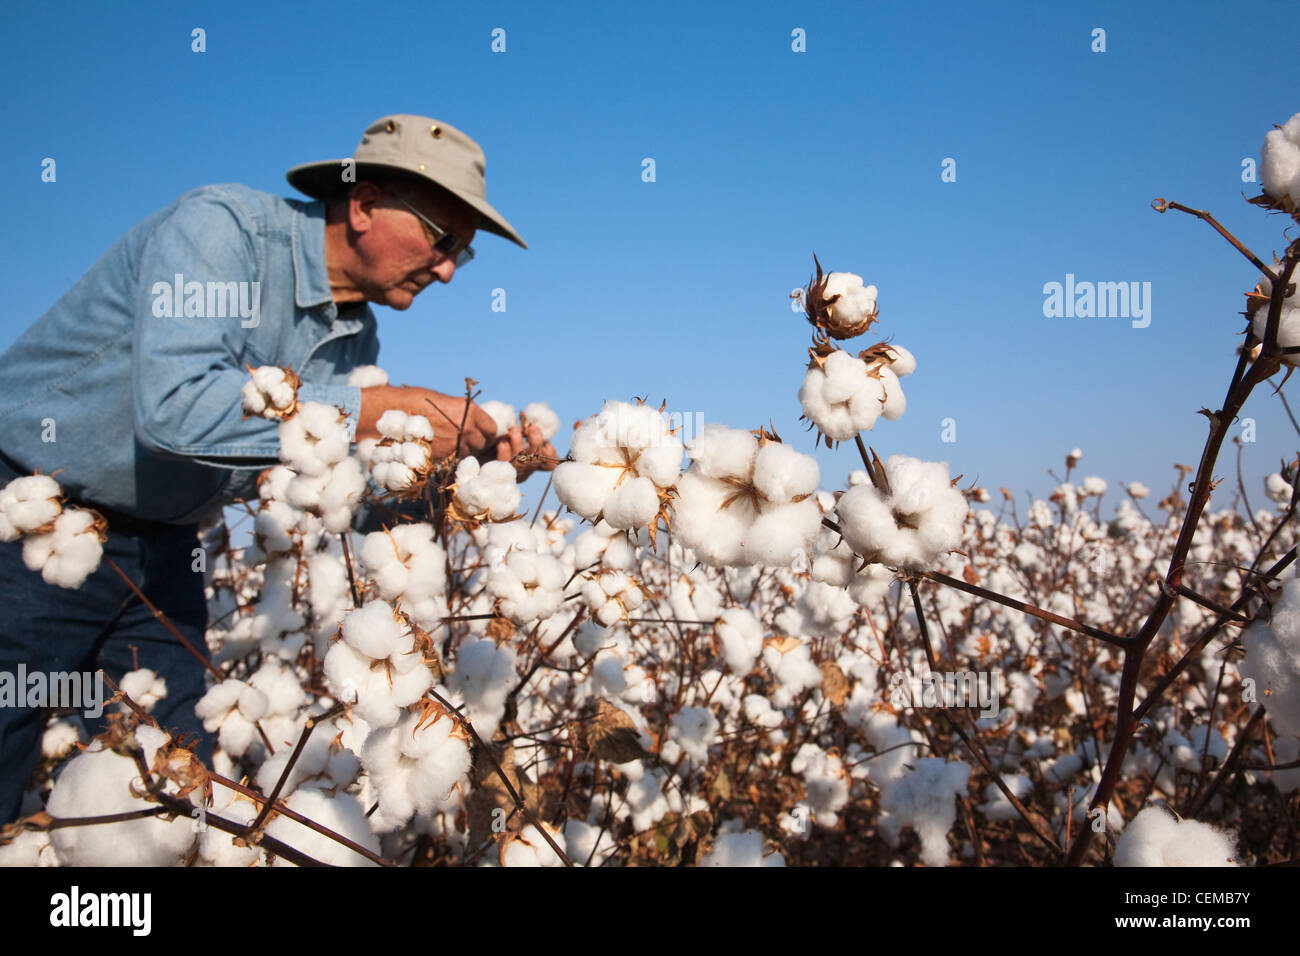 A farmer (grower) inspects his mature harvest stage high yield cotton crop to determine when to begin the harvest / Arkansas. Stock Photo